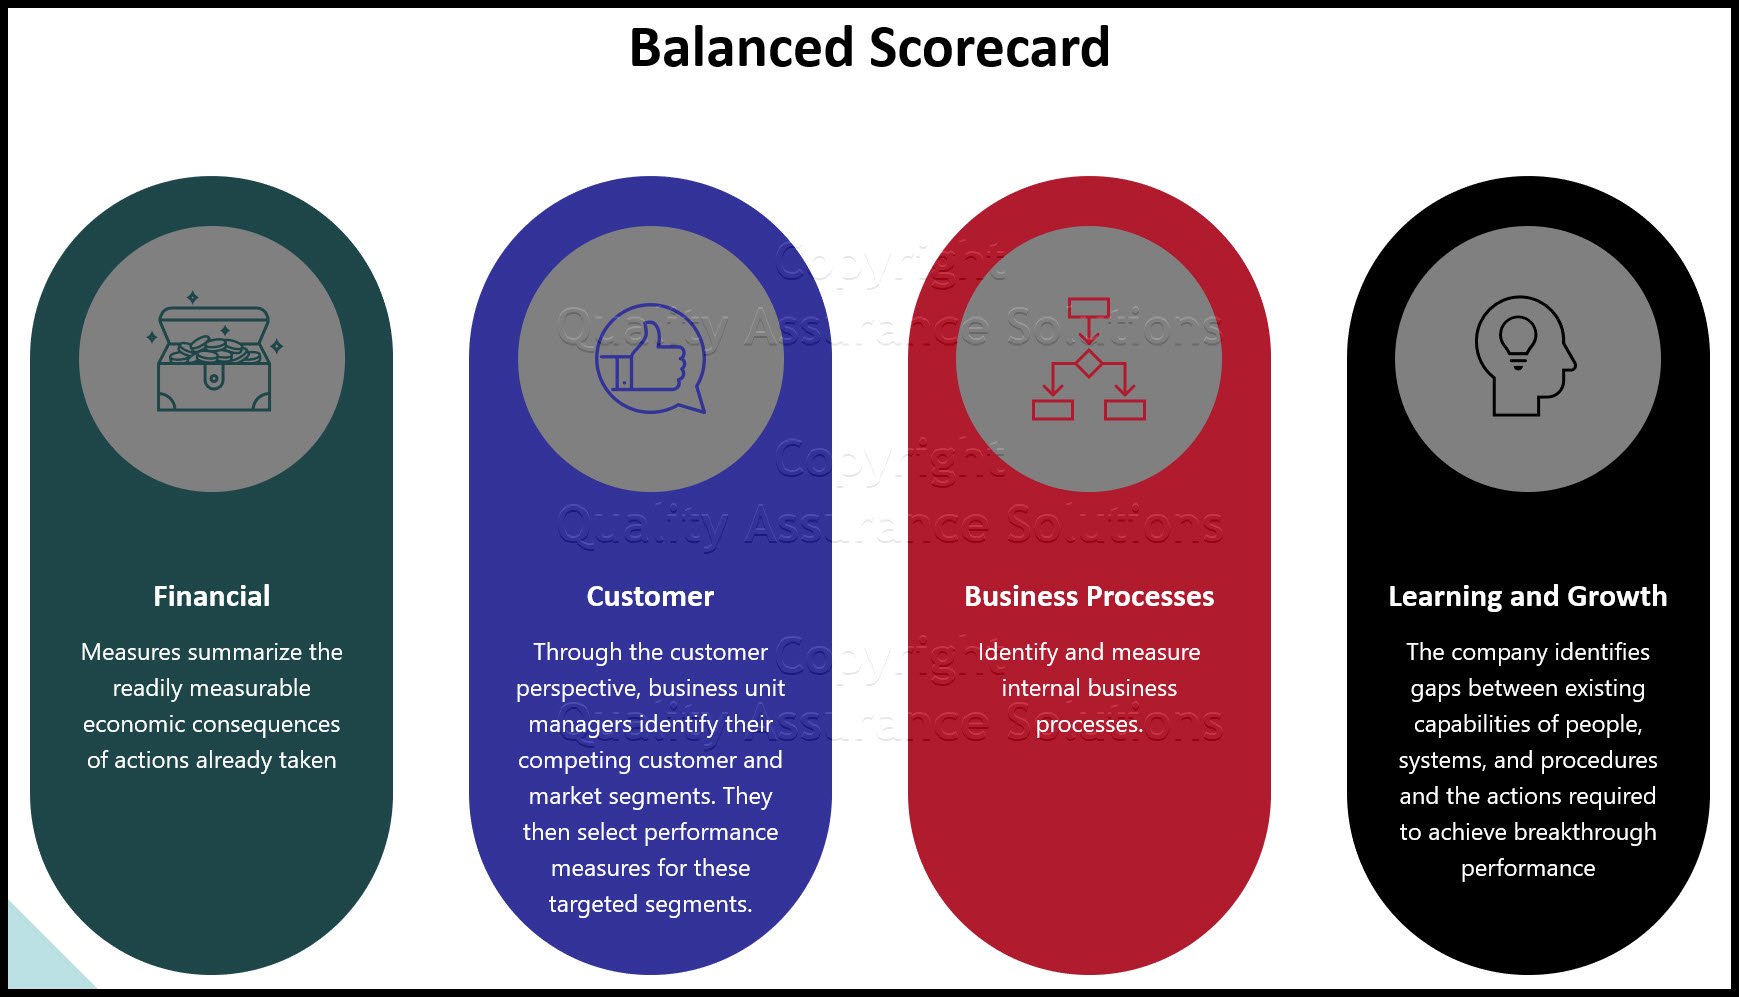 The Balanced Scorecard provides a clear prescription as to what companies should measure in order to 'balance' the financial perspective